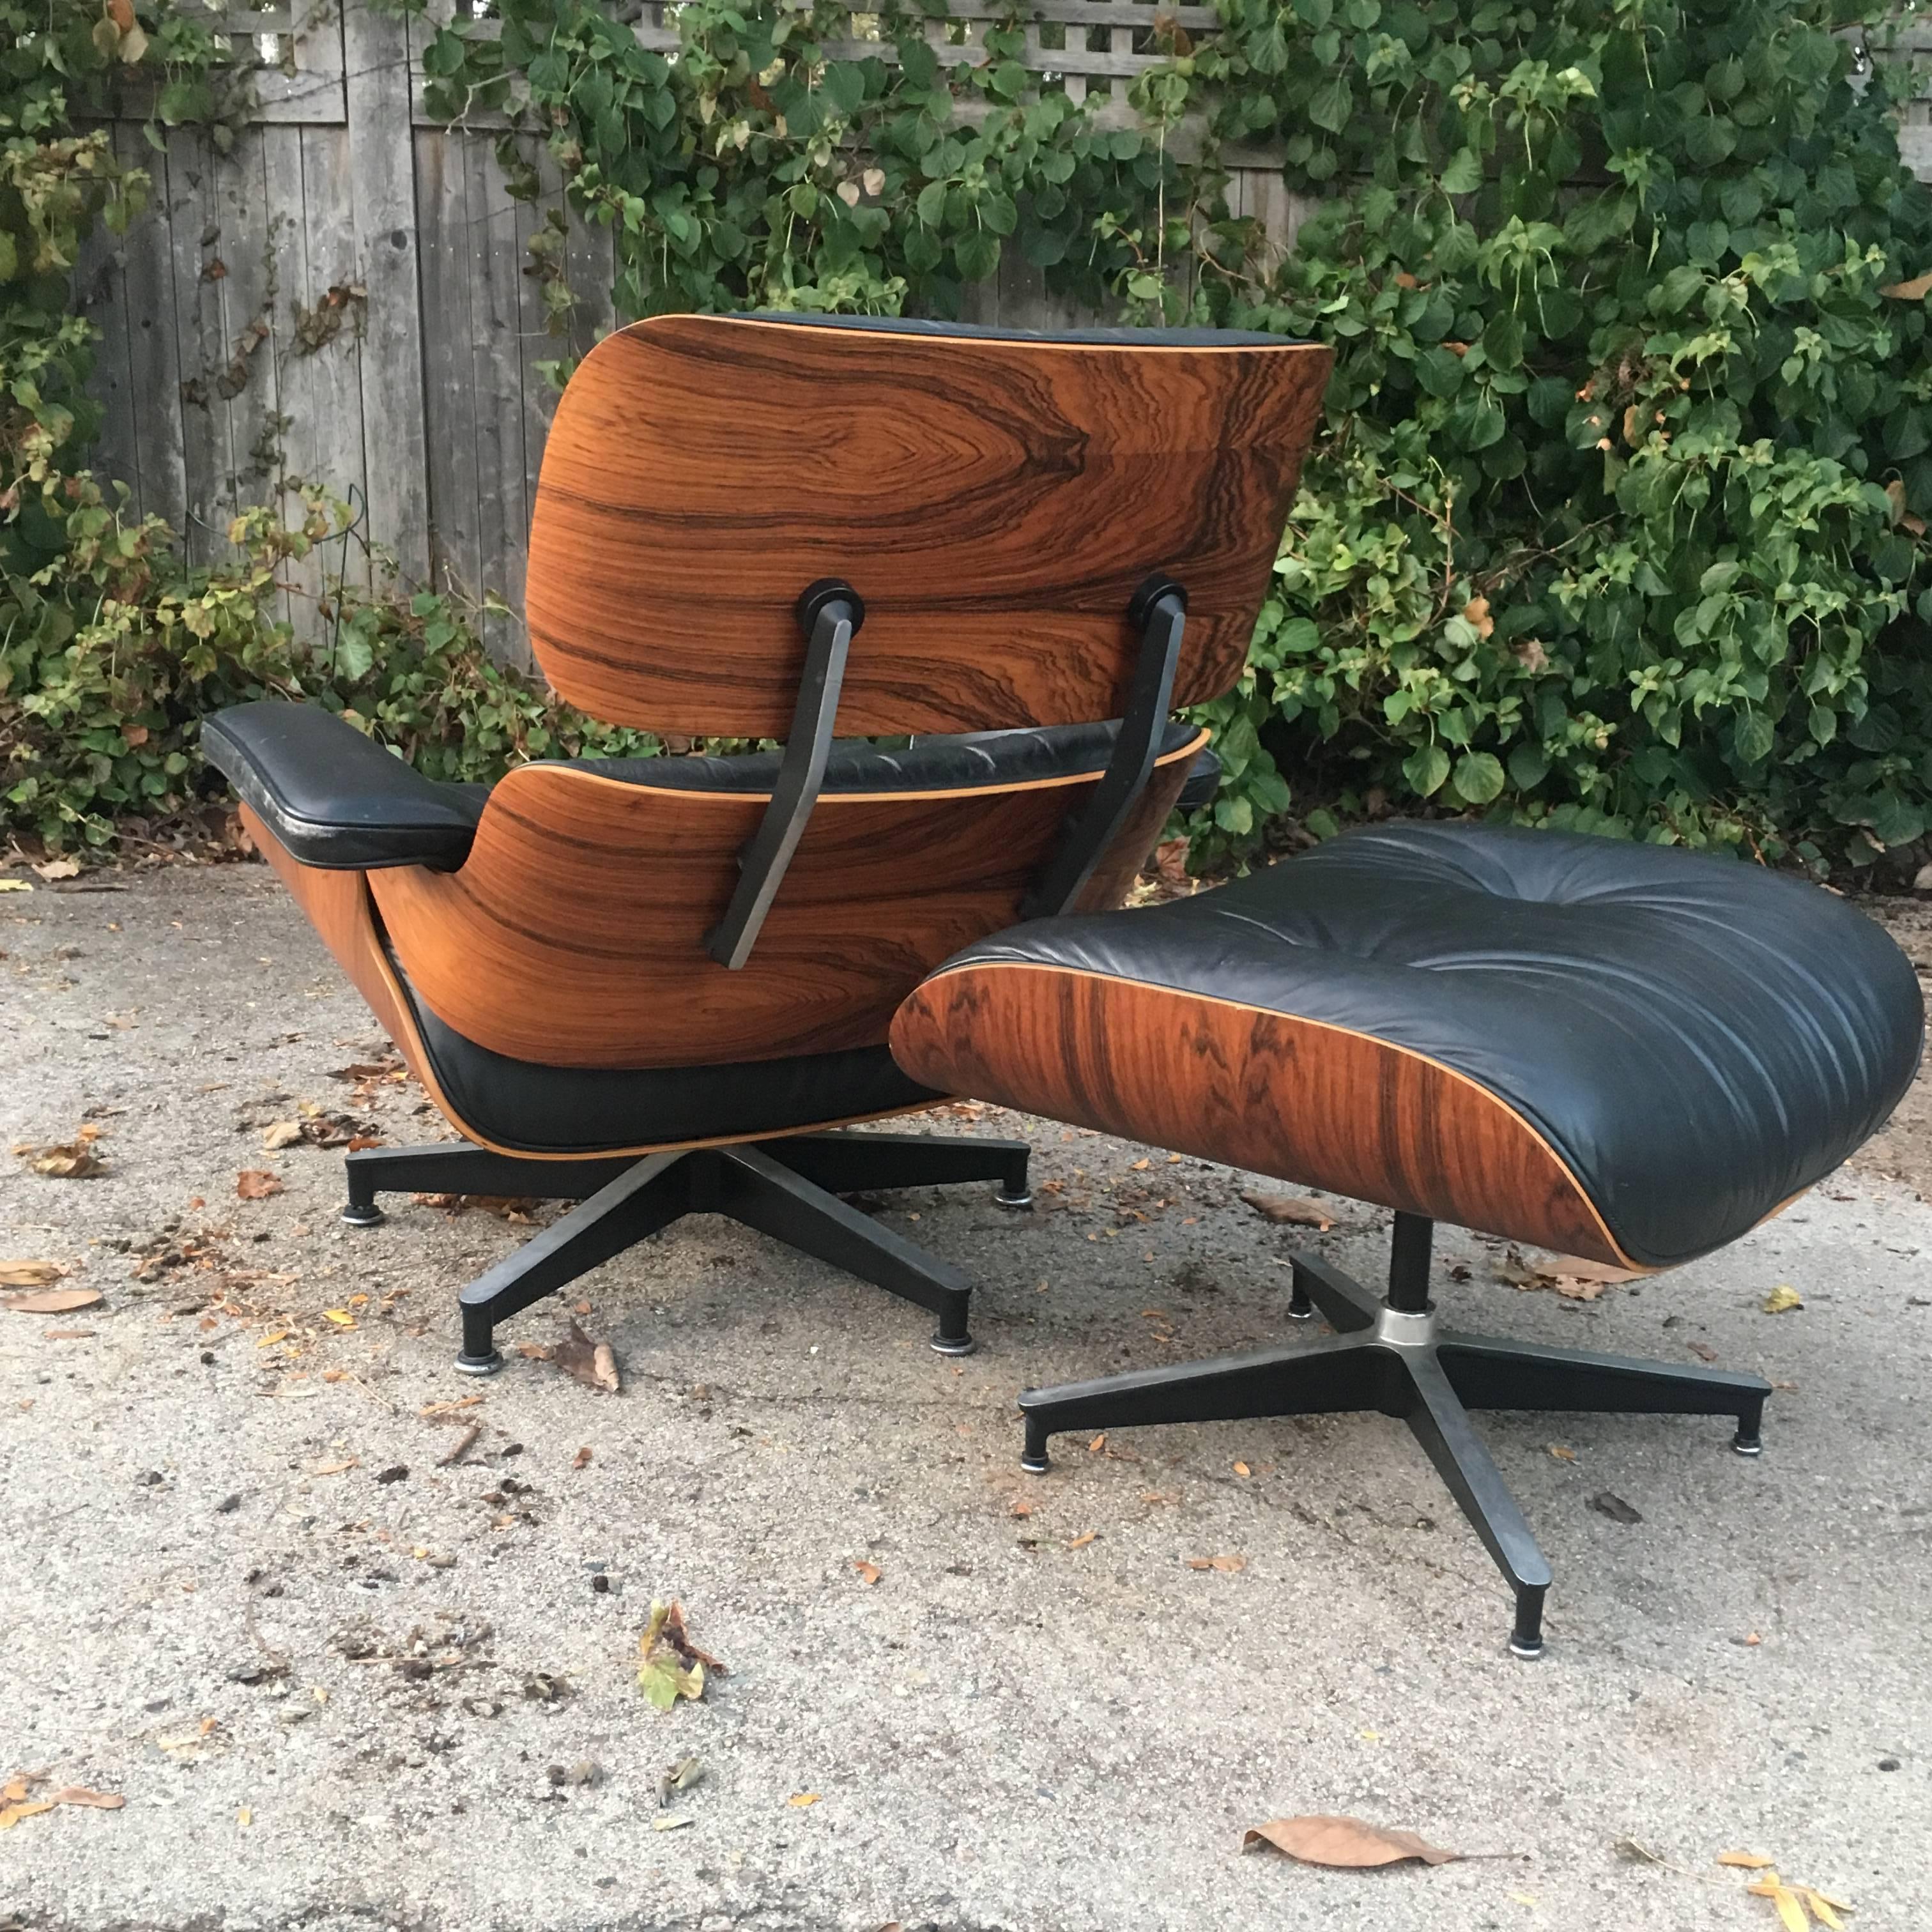 1970s edition in perfect vintage condition. The most attractive rosewood grains we have ever seen out of dozens of chairs. Completely original wood and leather and parts. A superb example of this iconic design.